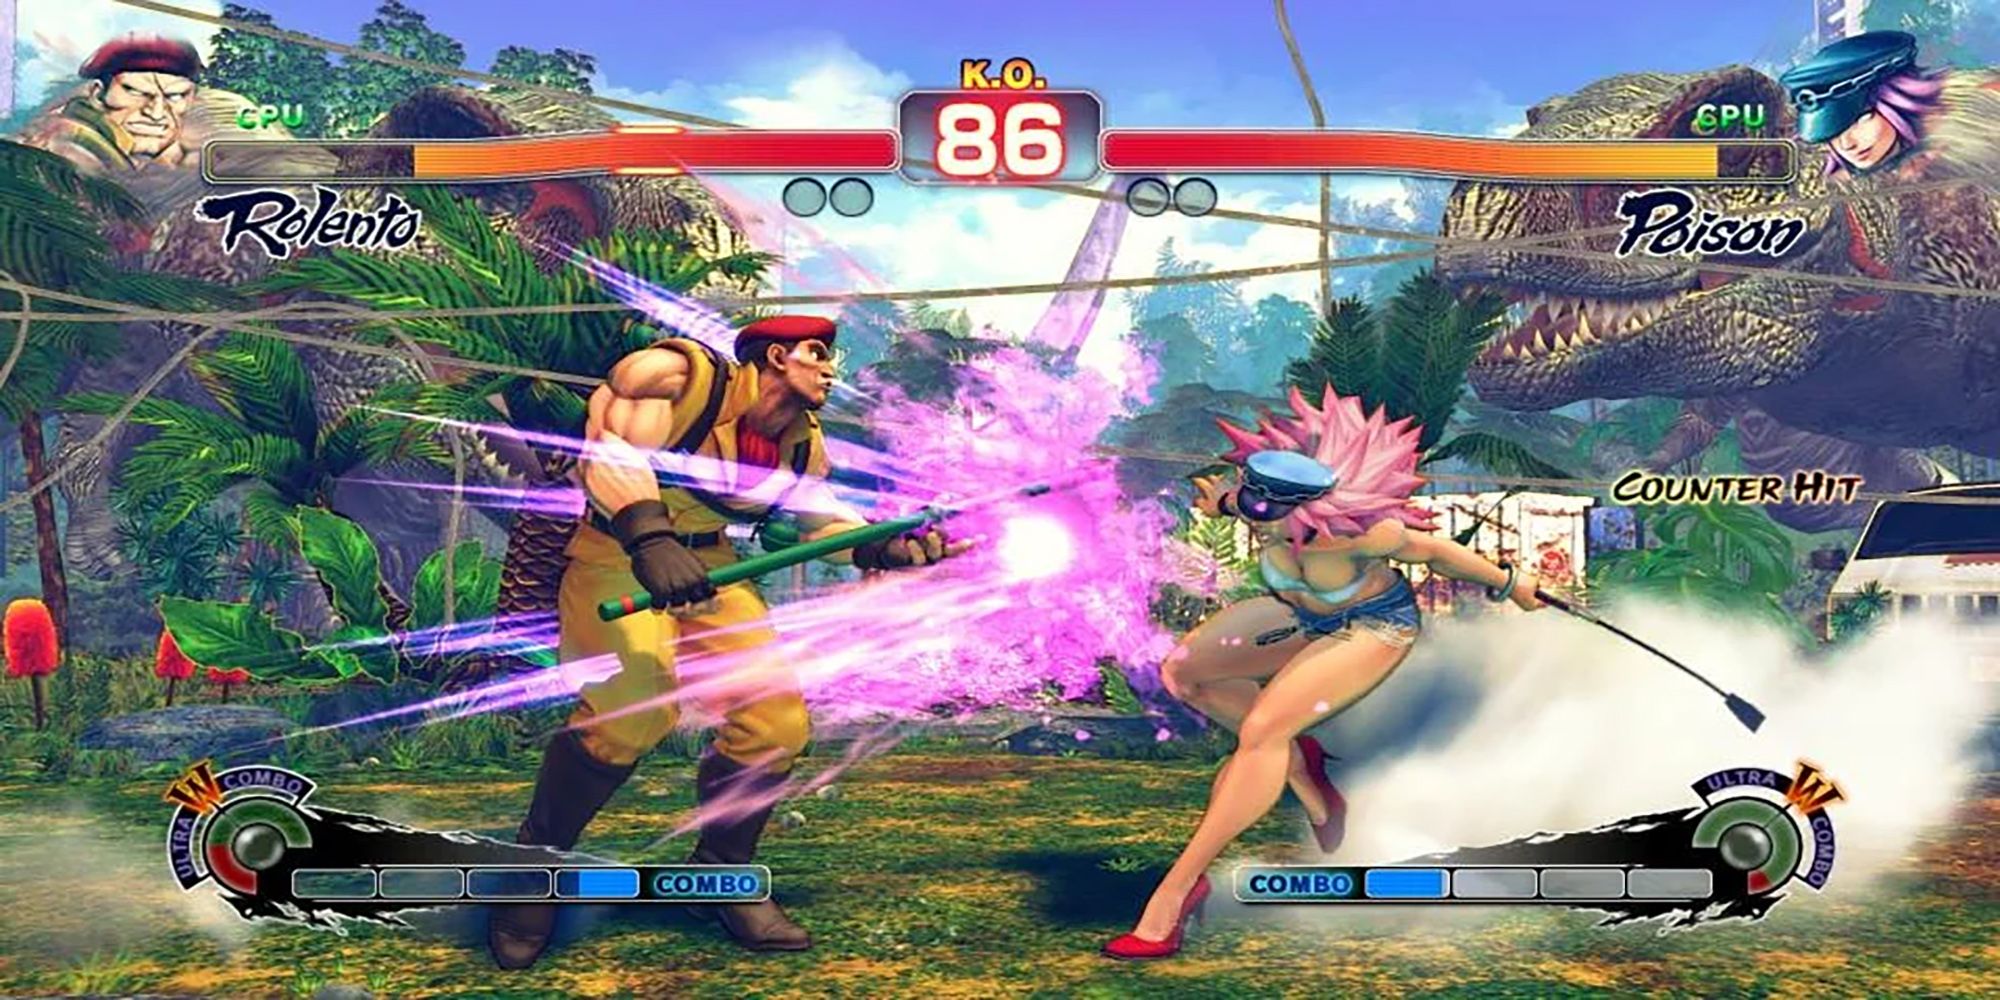 Poison Counter Hits Rolento during a battle in a Dinosaur park in Ultra Street Fighter 4.